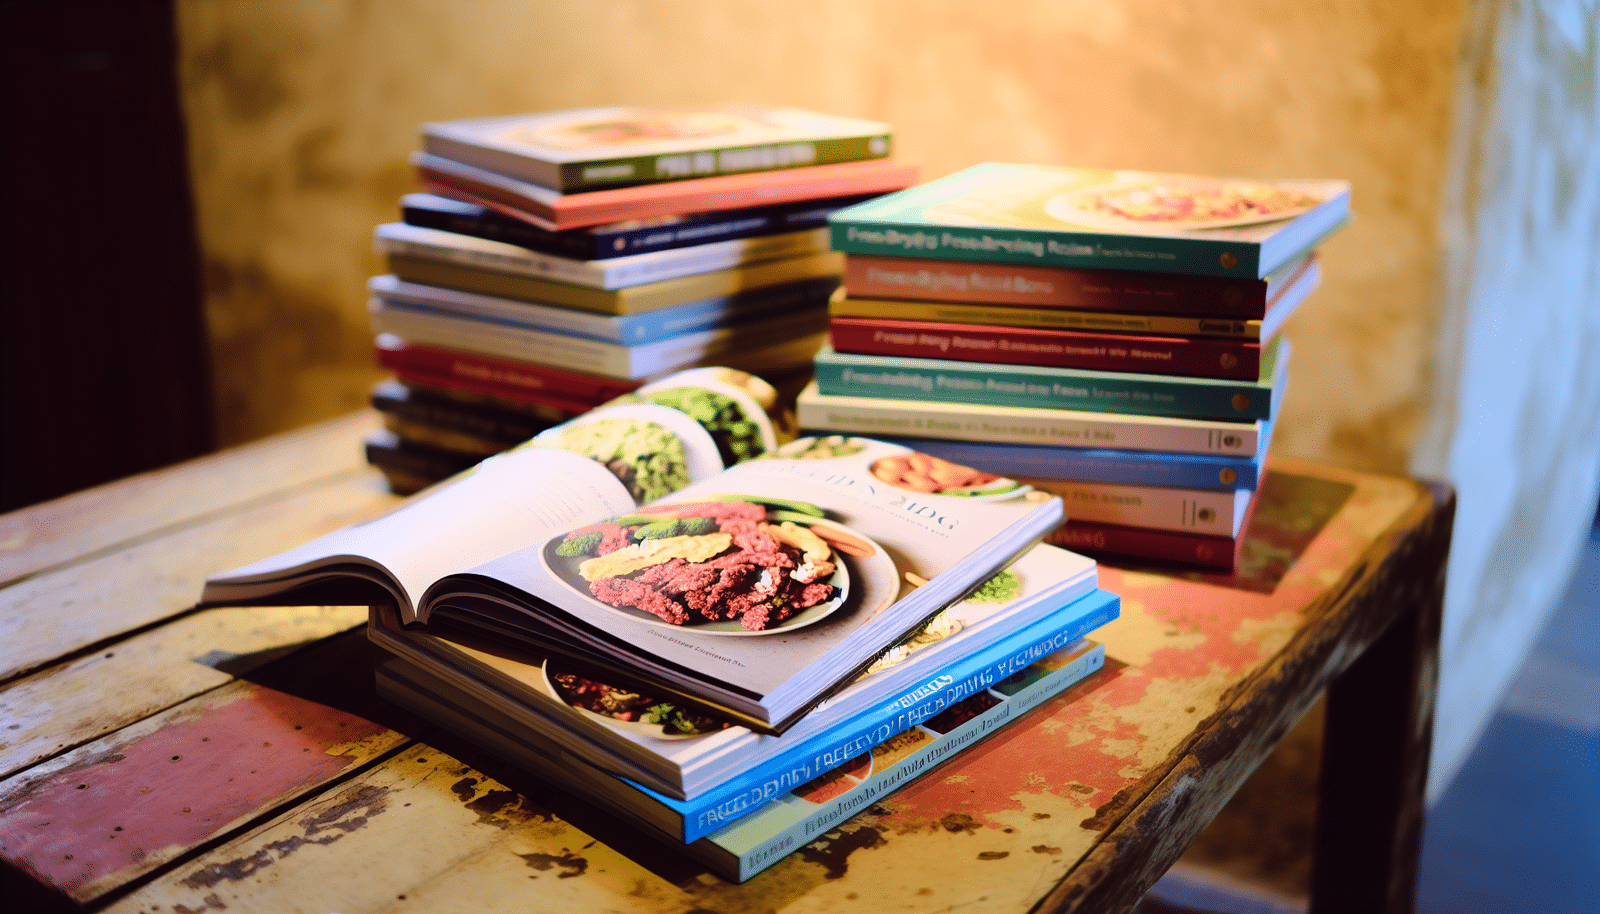 A variety of freeze-drying recipe books displayed on a wooden table